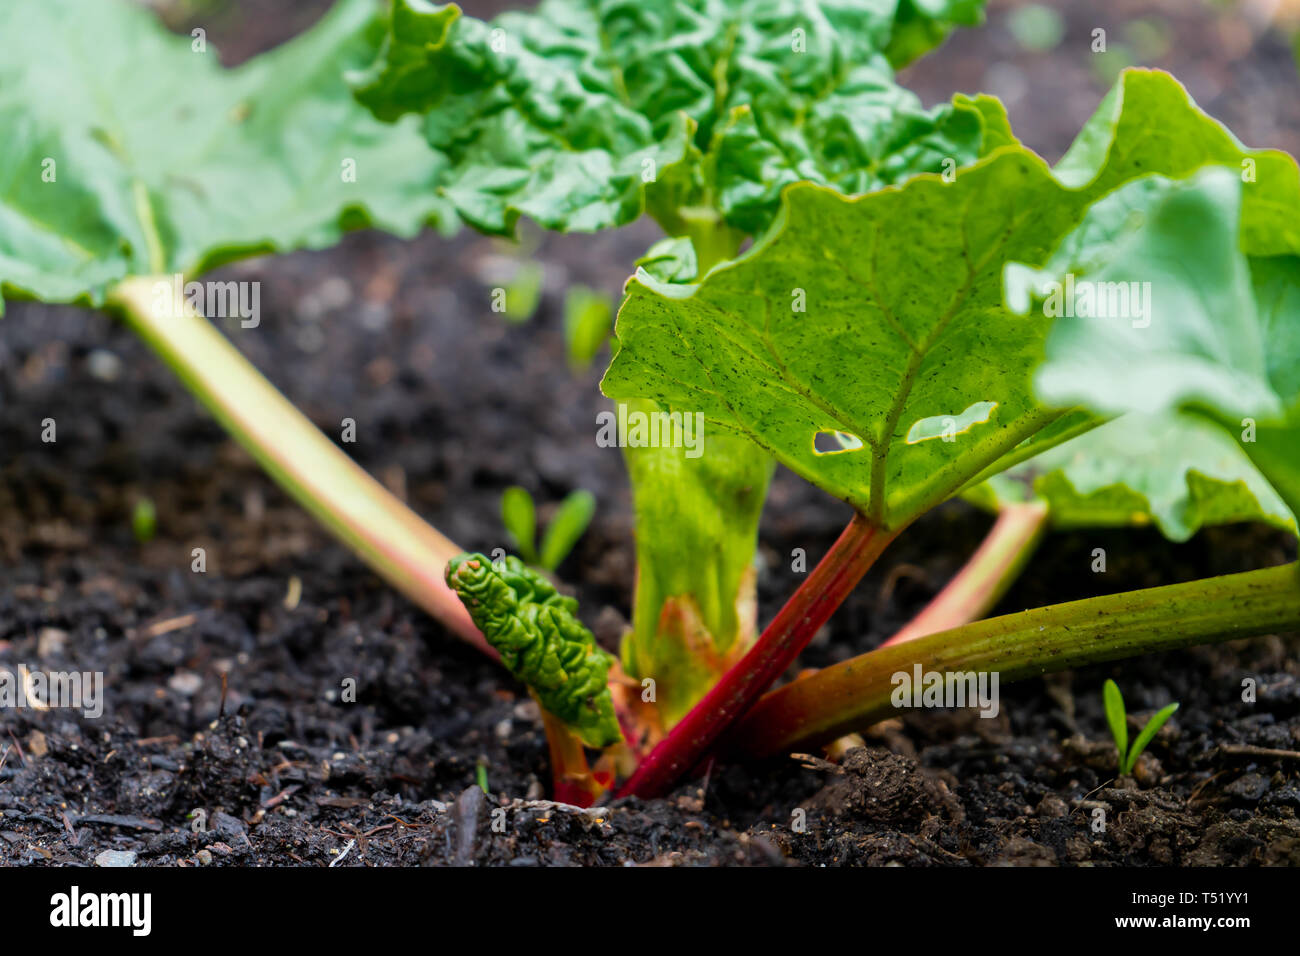 Early spring red rhubarb stalks growing out of a rhubarb crown. Depicting edible, perennial vegetable with oxalic acid, making poisonous leaves. Stock Photo